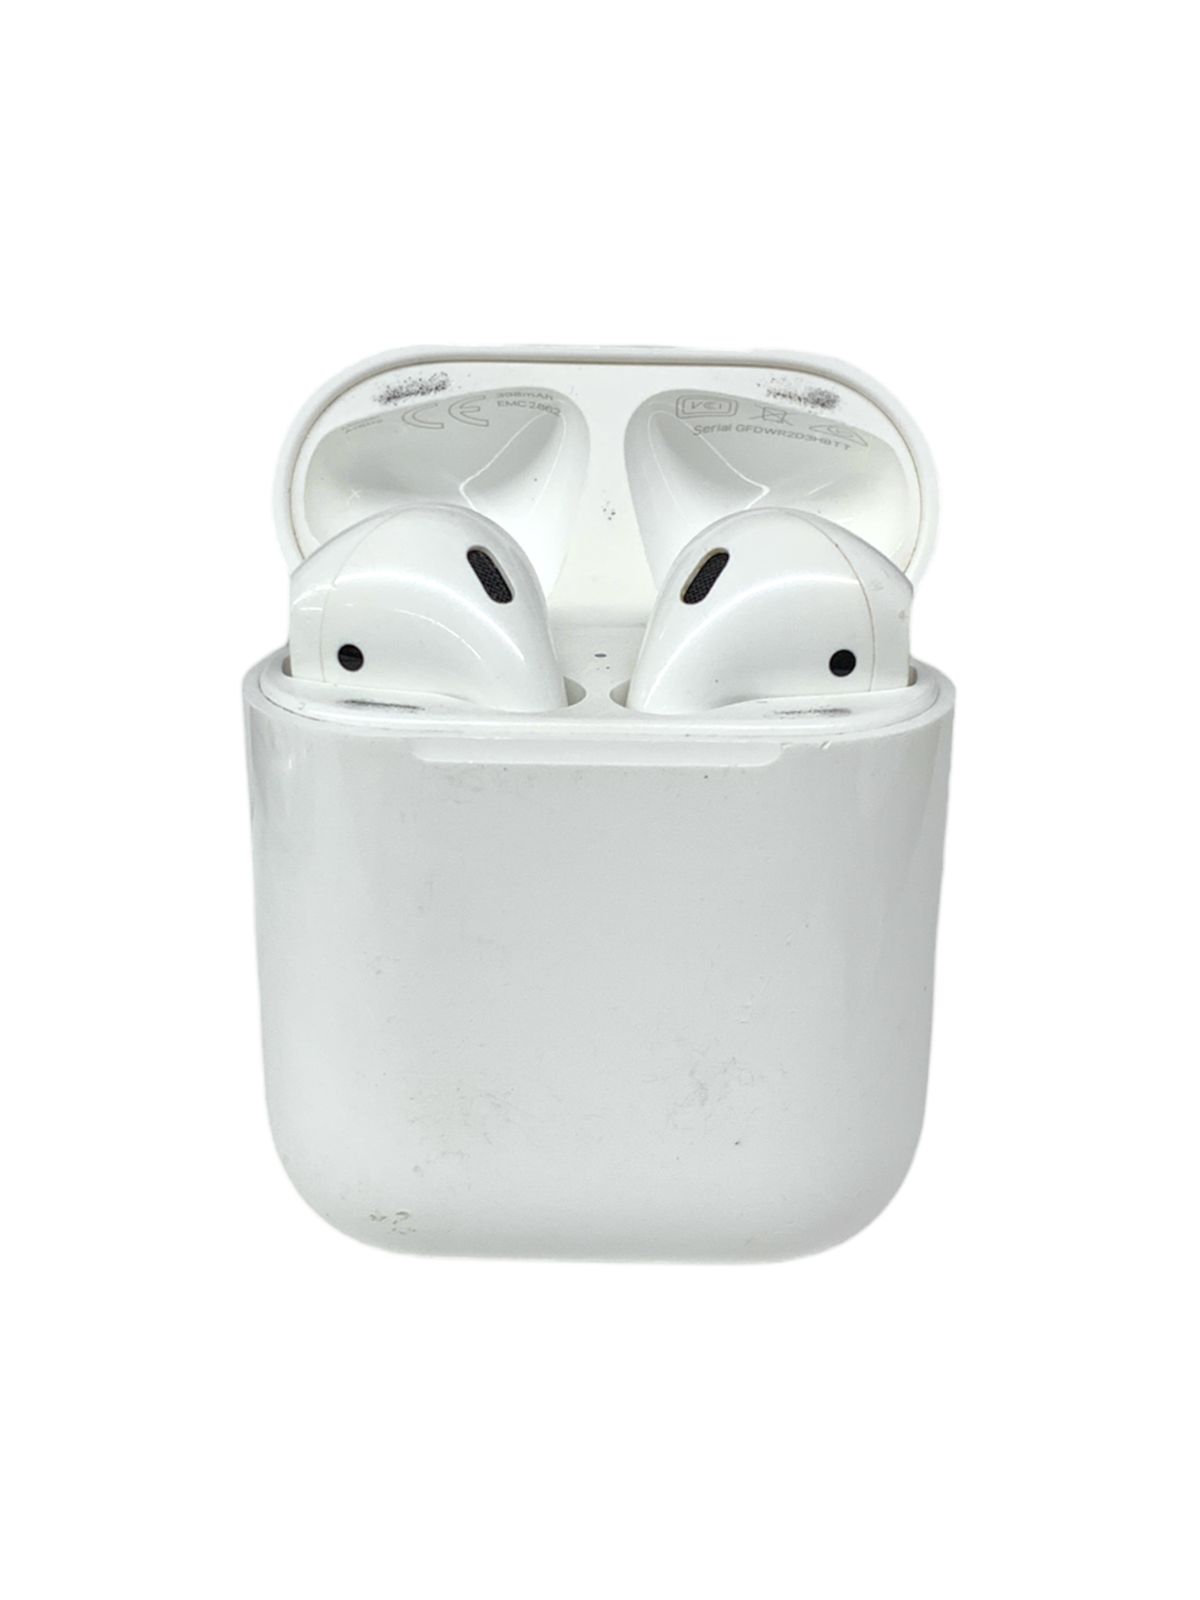 Apple(アップル) AirPods エアポッズ with Charging Case (第2世代